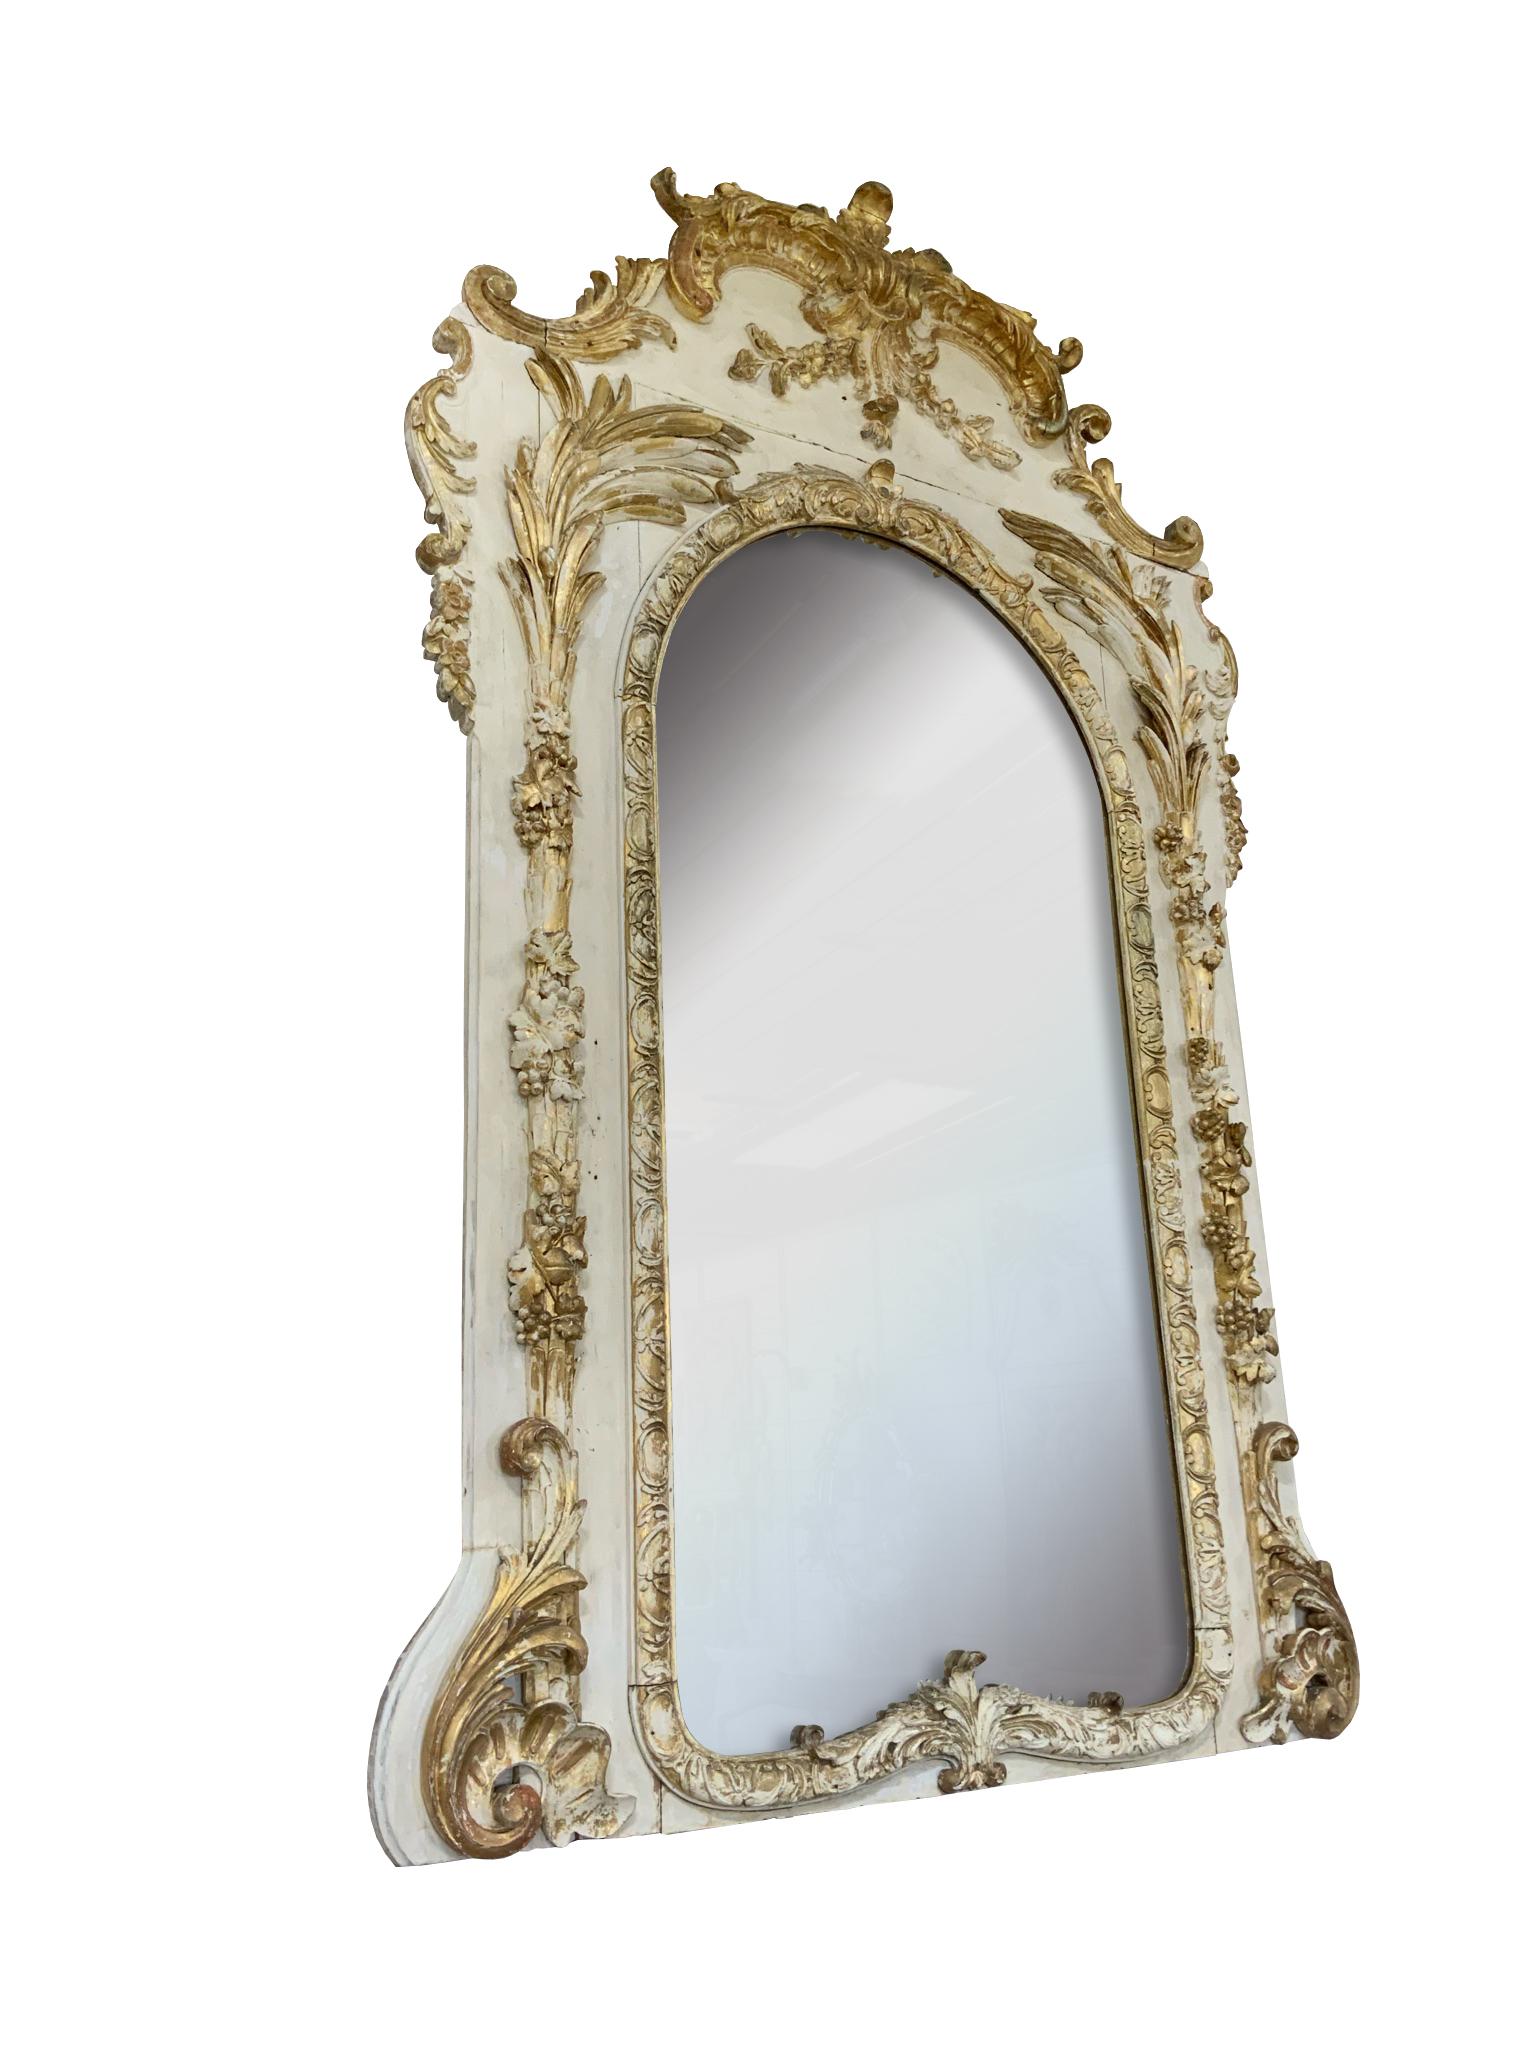 Hand-Carved 19th Century French White/Cream and Gold French Mirror